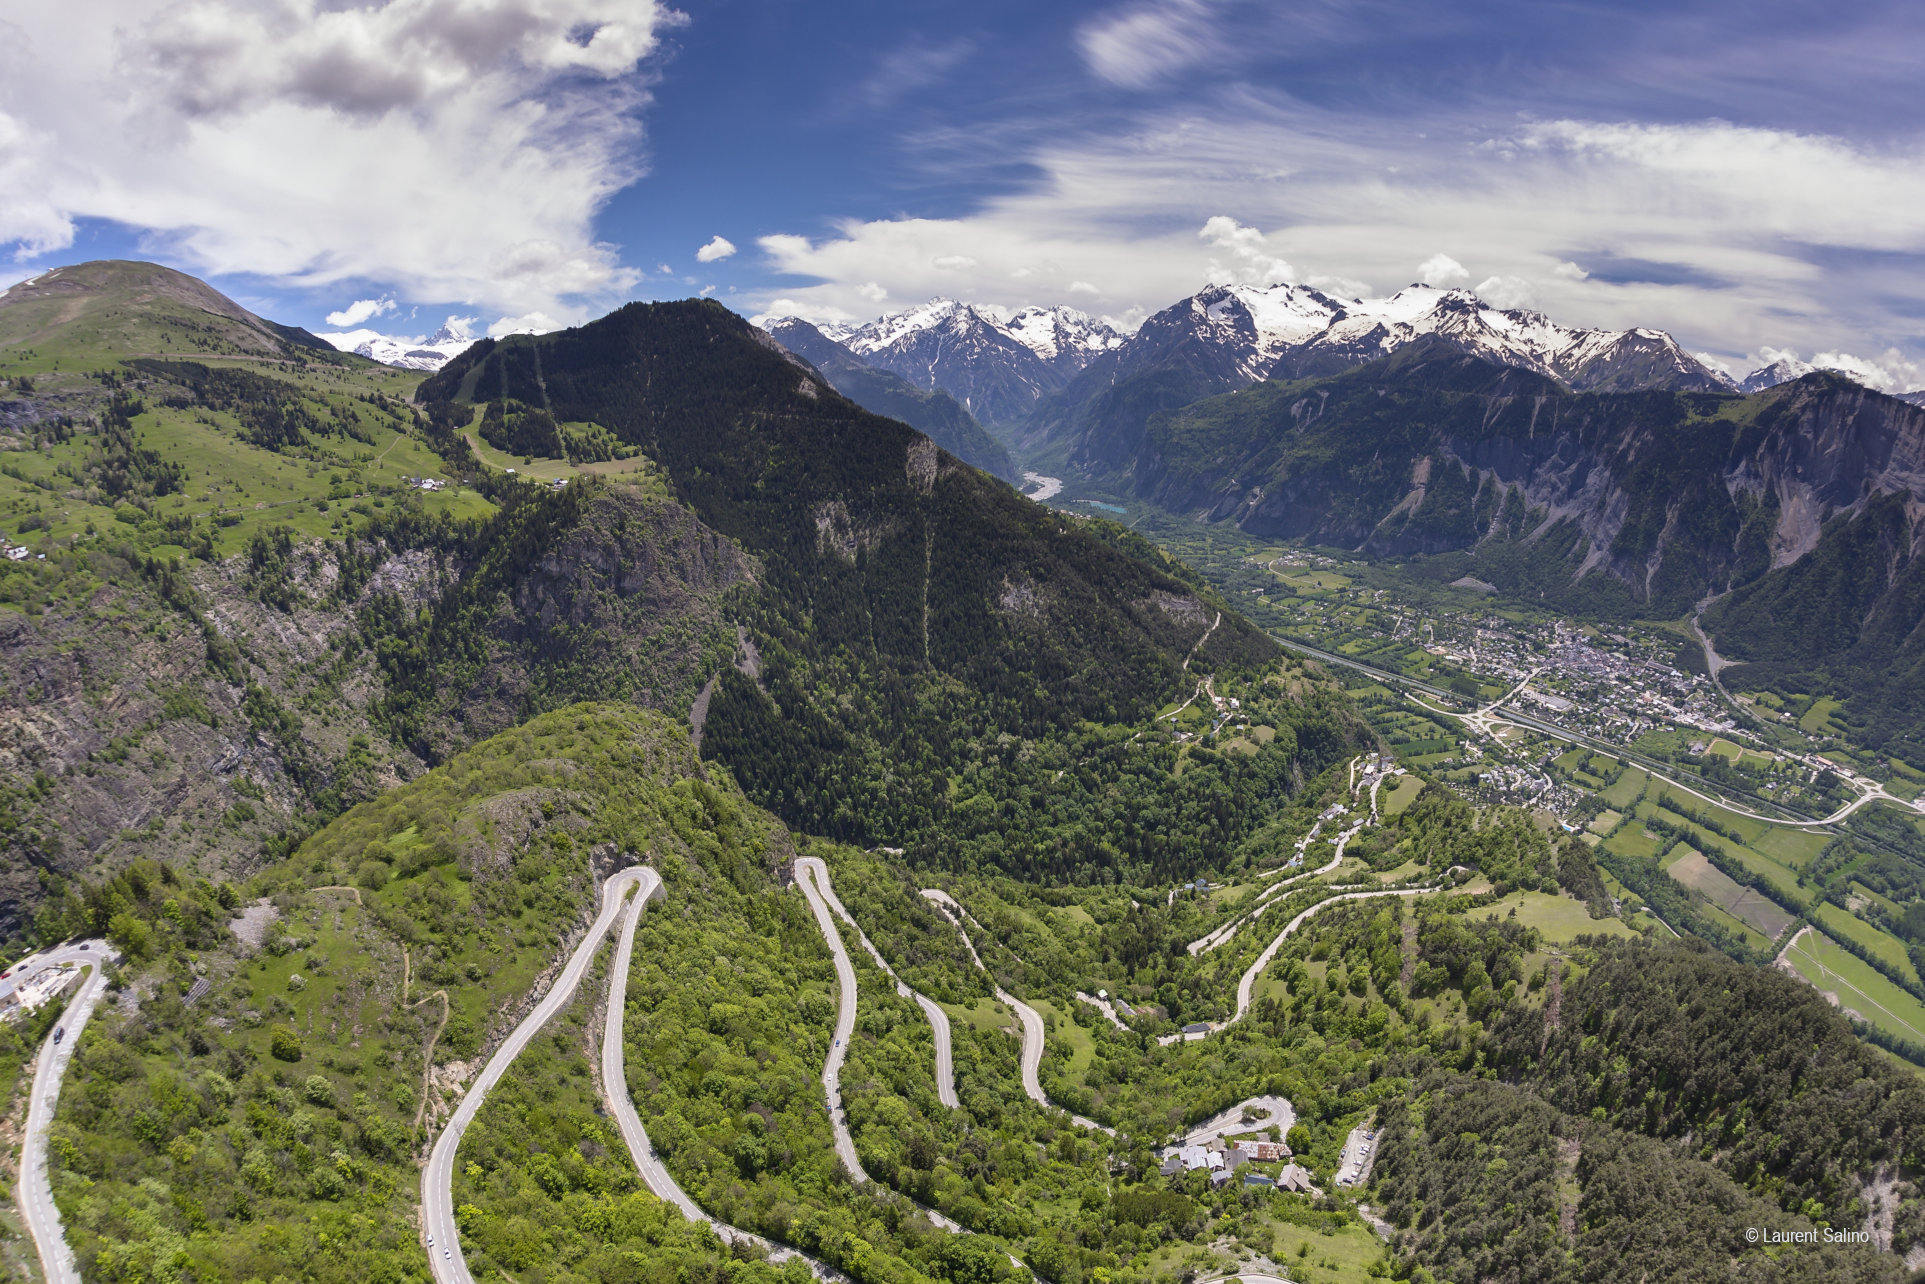 The 21 turns of Alpe d'Huez | English